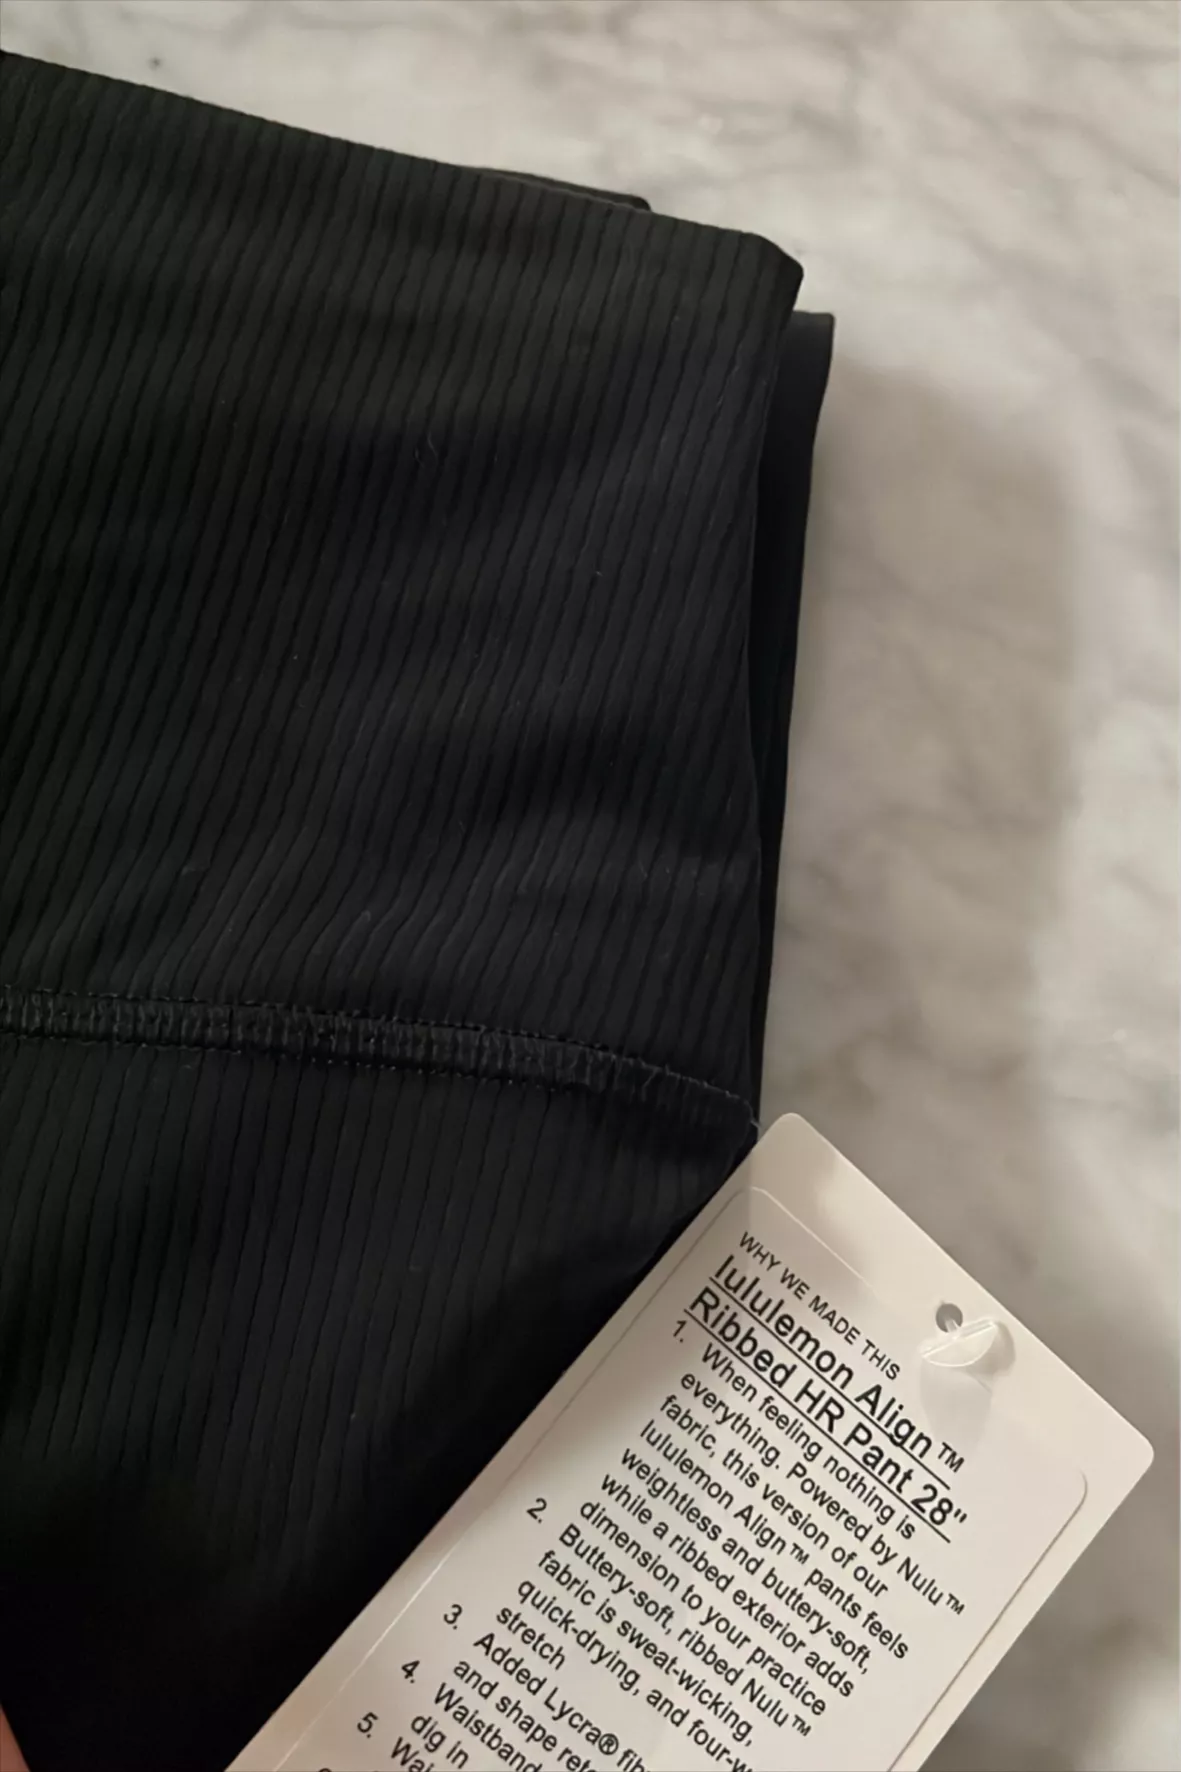 Lululemon Align High-Rise Pant 28” Size 4 - Brand new With Tags